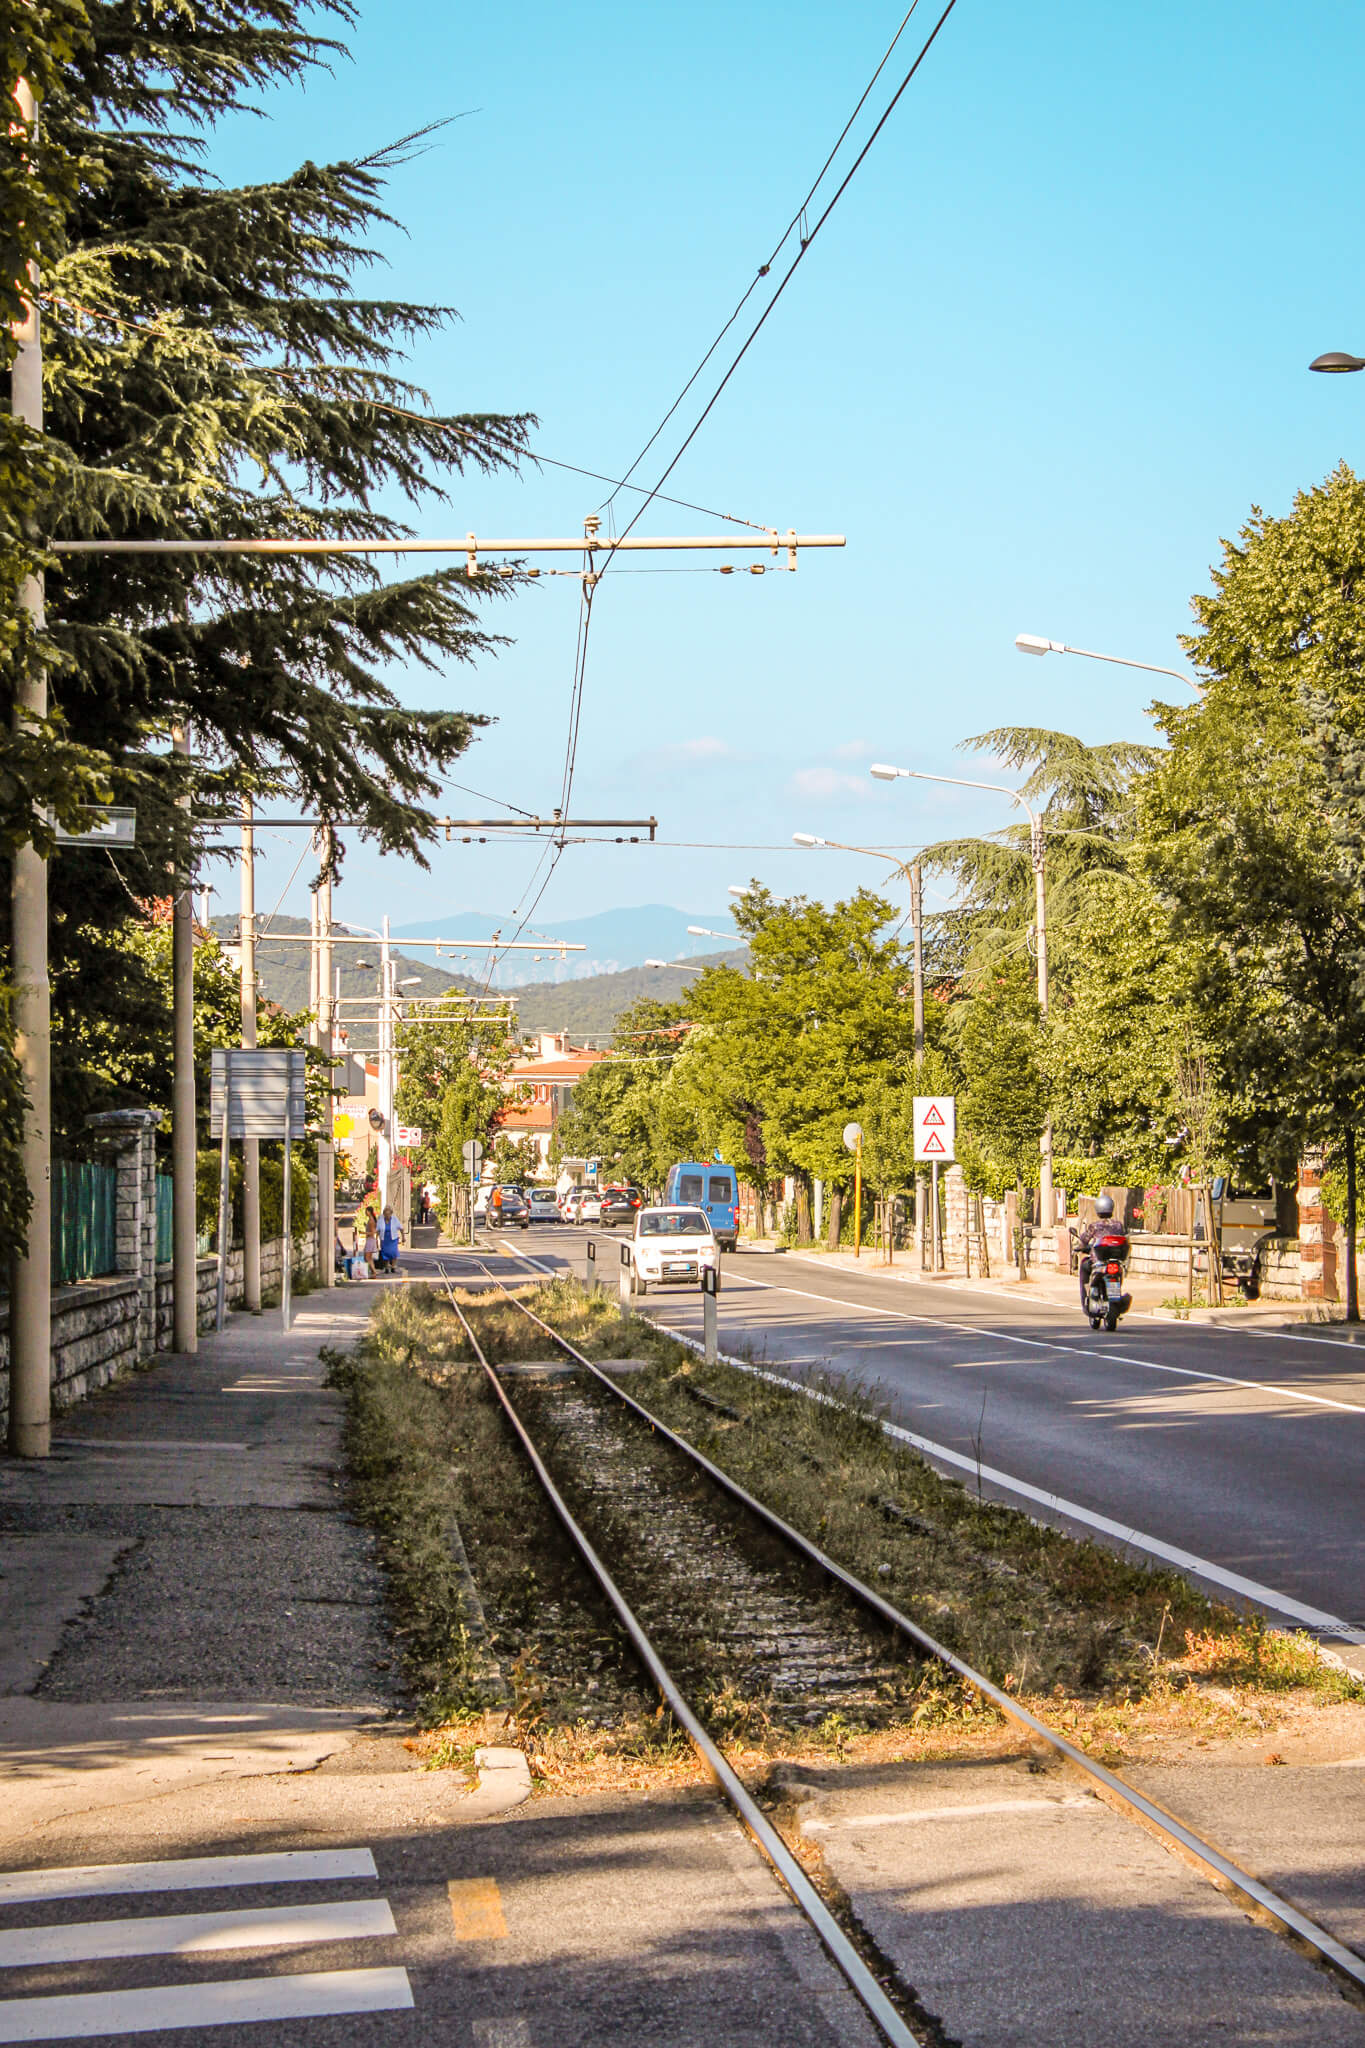 Tracks for the Trieste-Opicina tramway